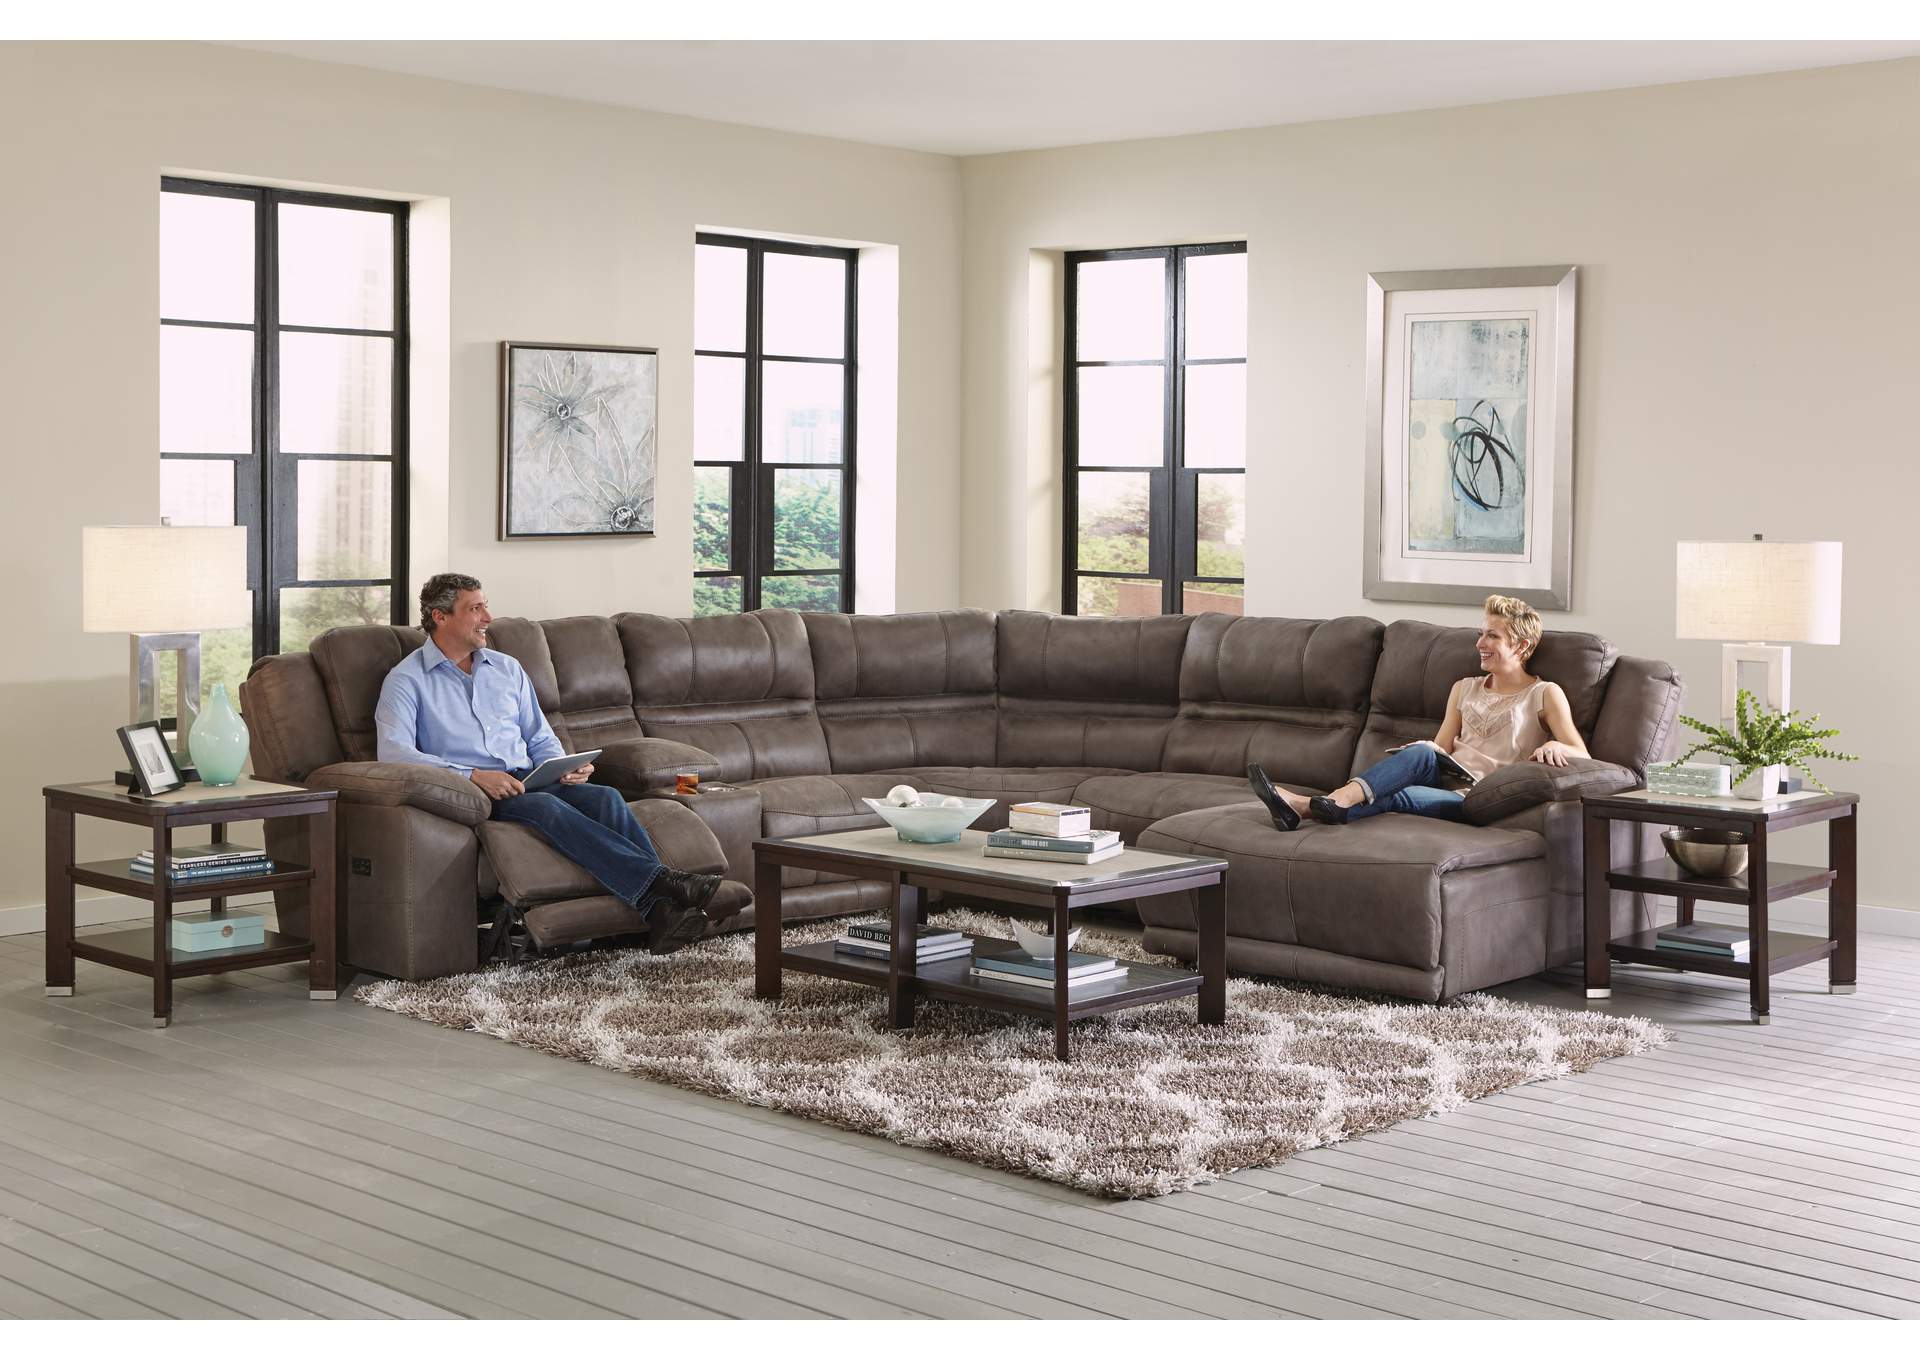 Braxton Charcoal RAF Chaise Sectional,Jackson Catnapper